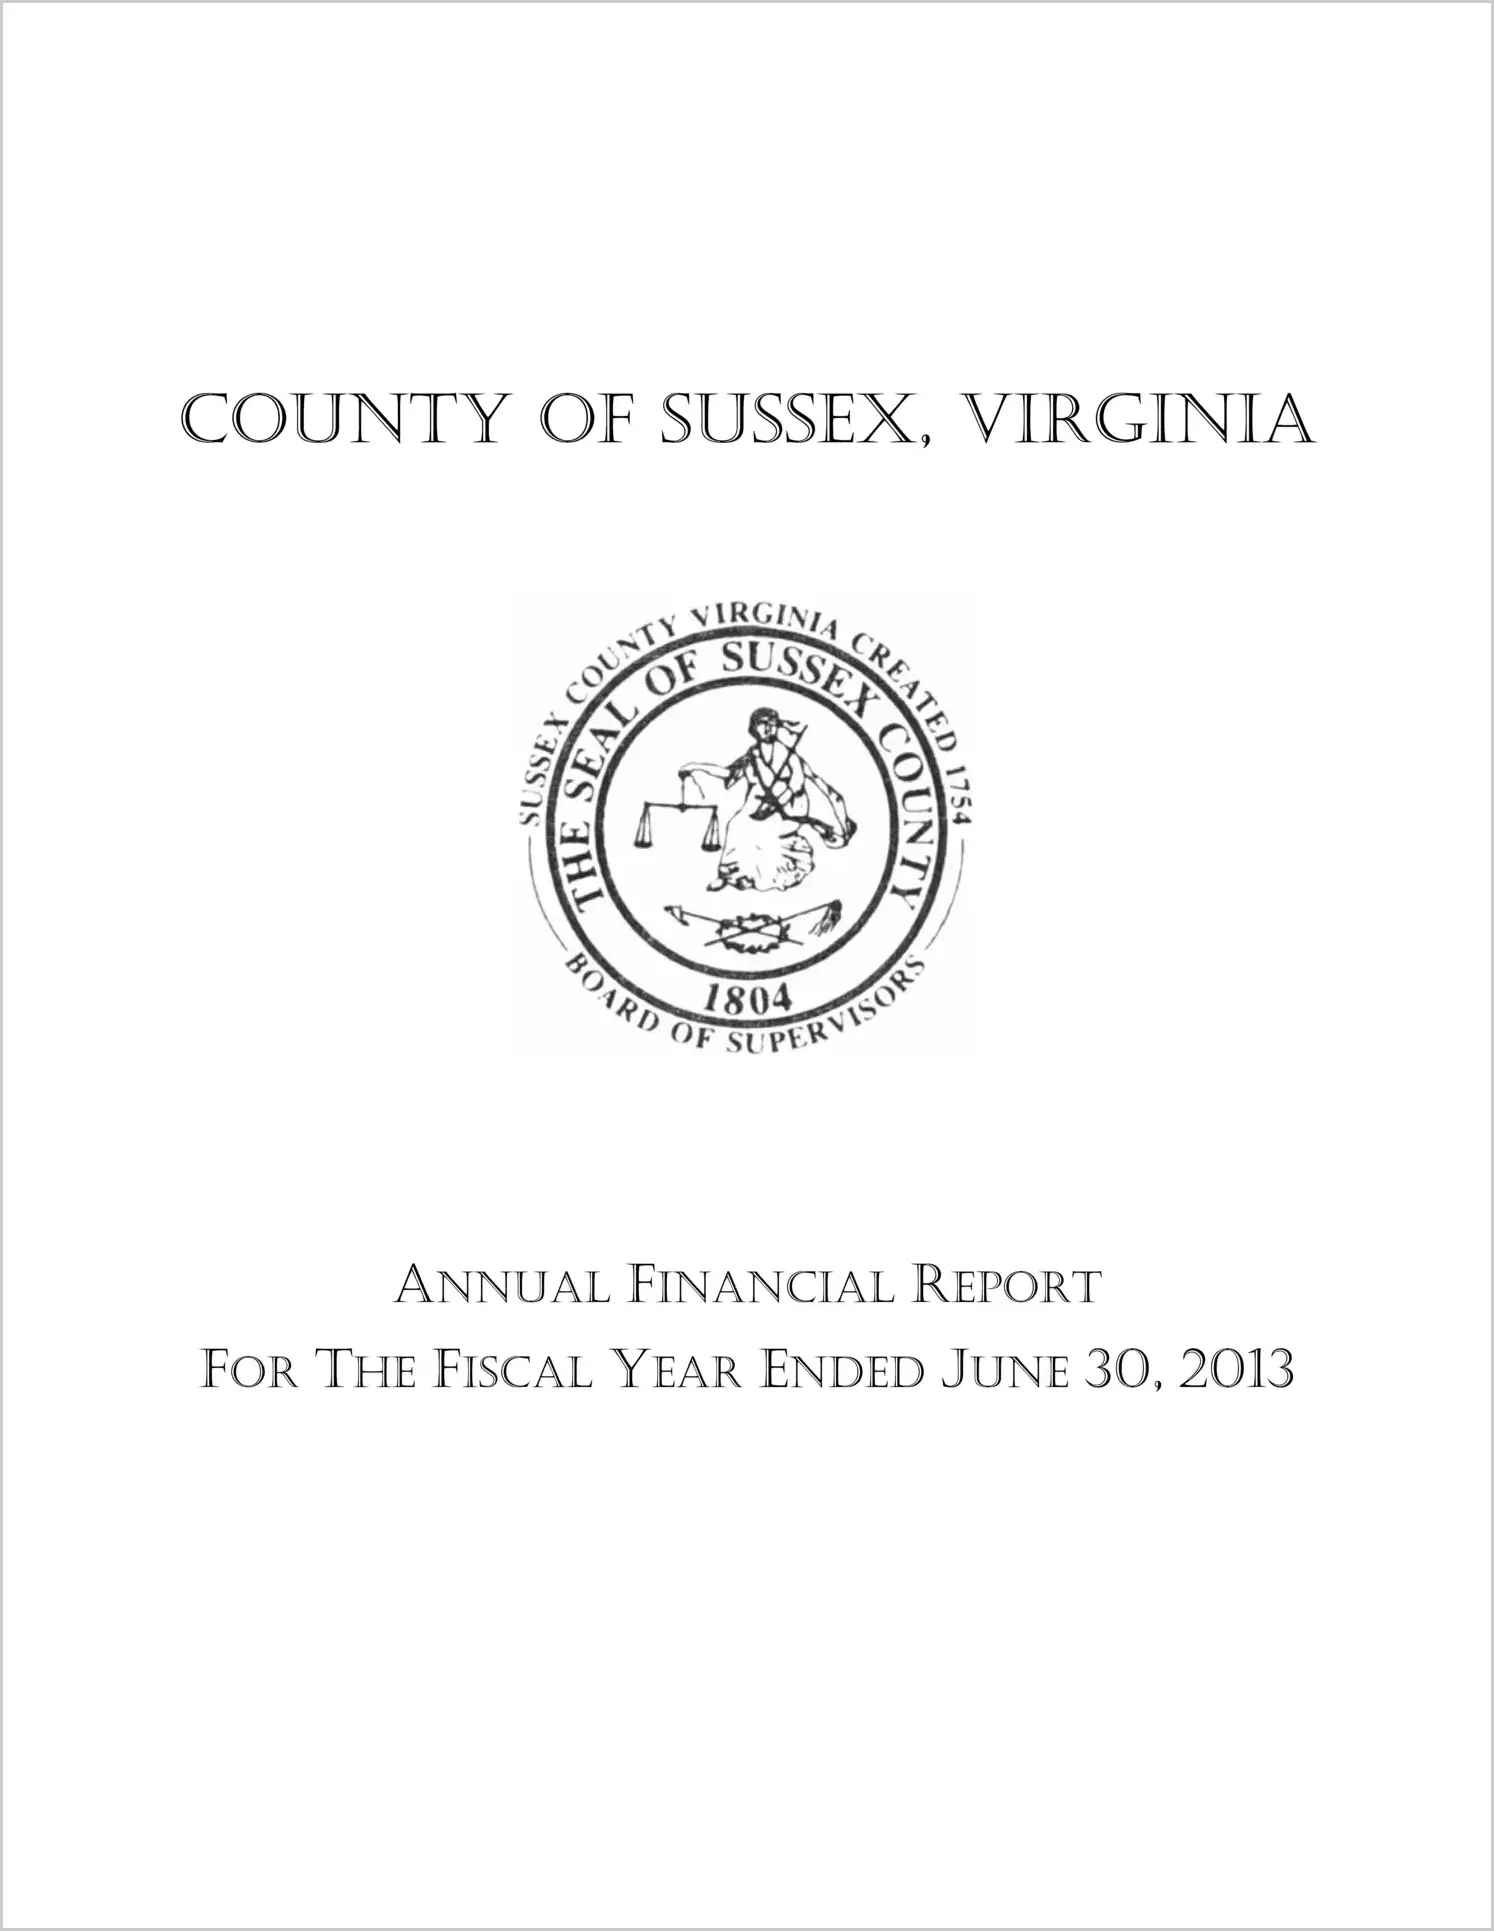 2013 Annual Financial Report for County of Sussex